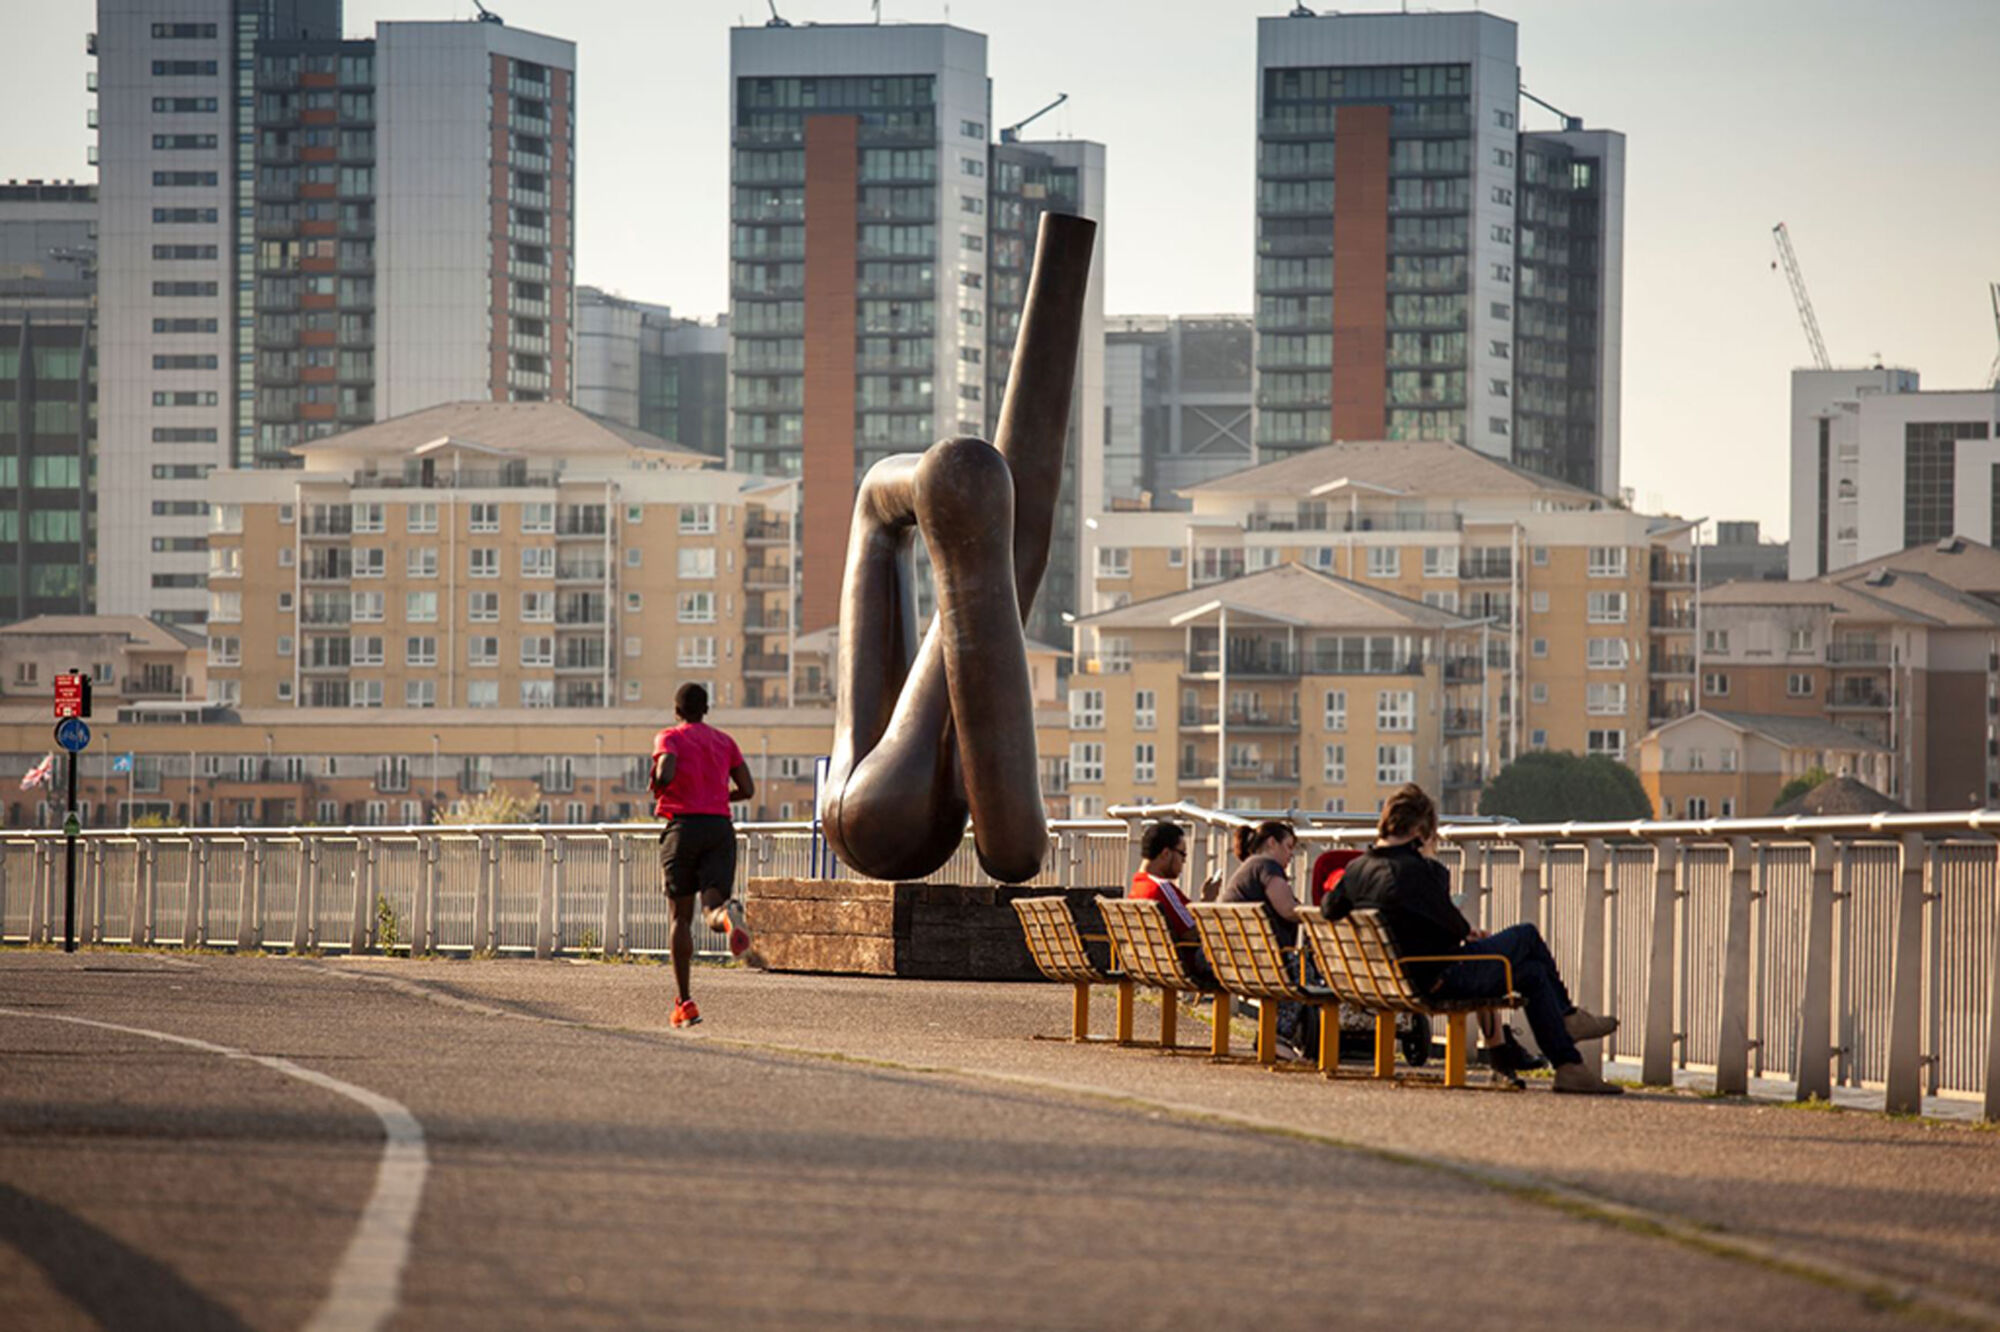 The Wick - Gary Hume, Liberty Grip
Greenwich Peninsula
Photo: Luis Veloso
Courtesy of The Line